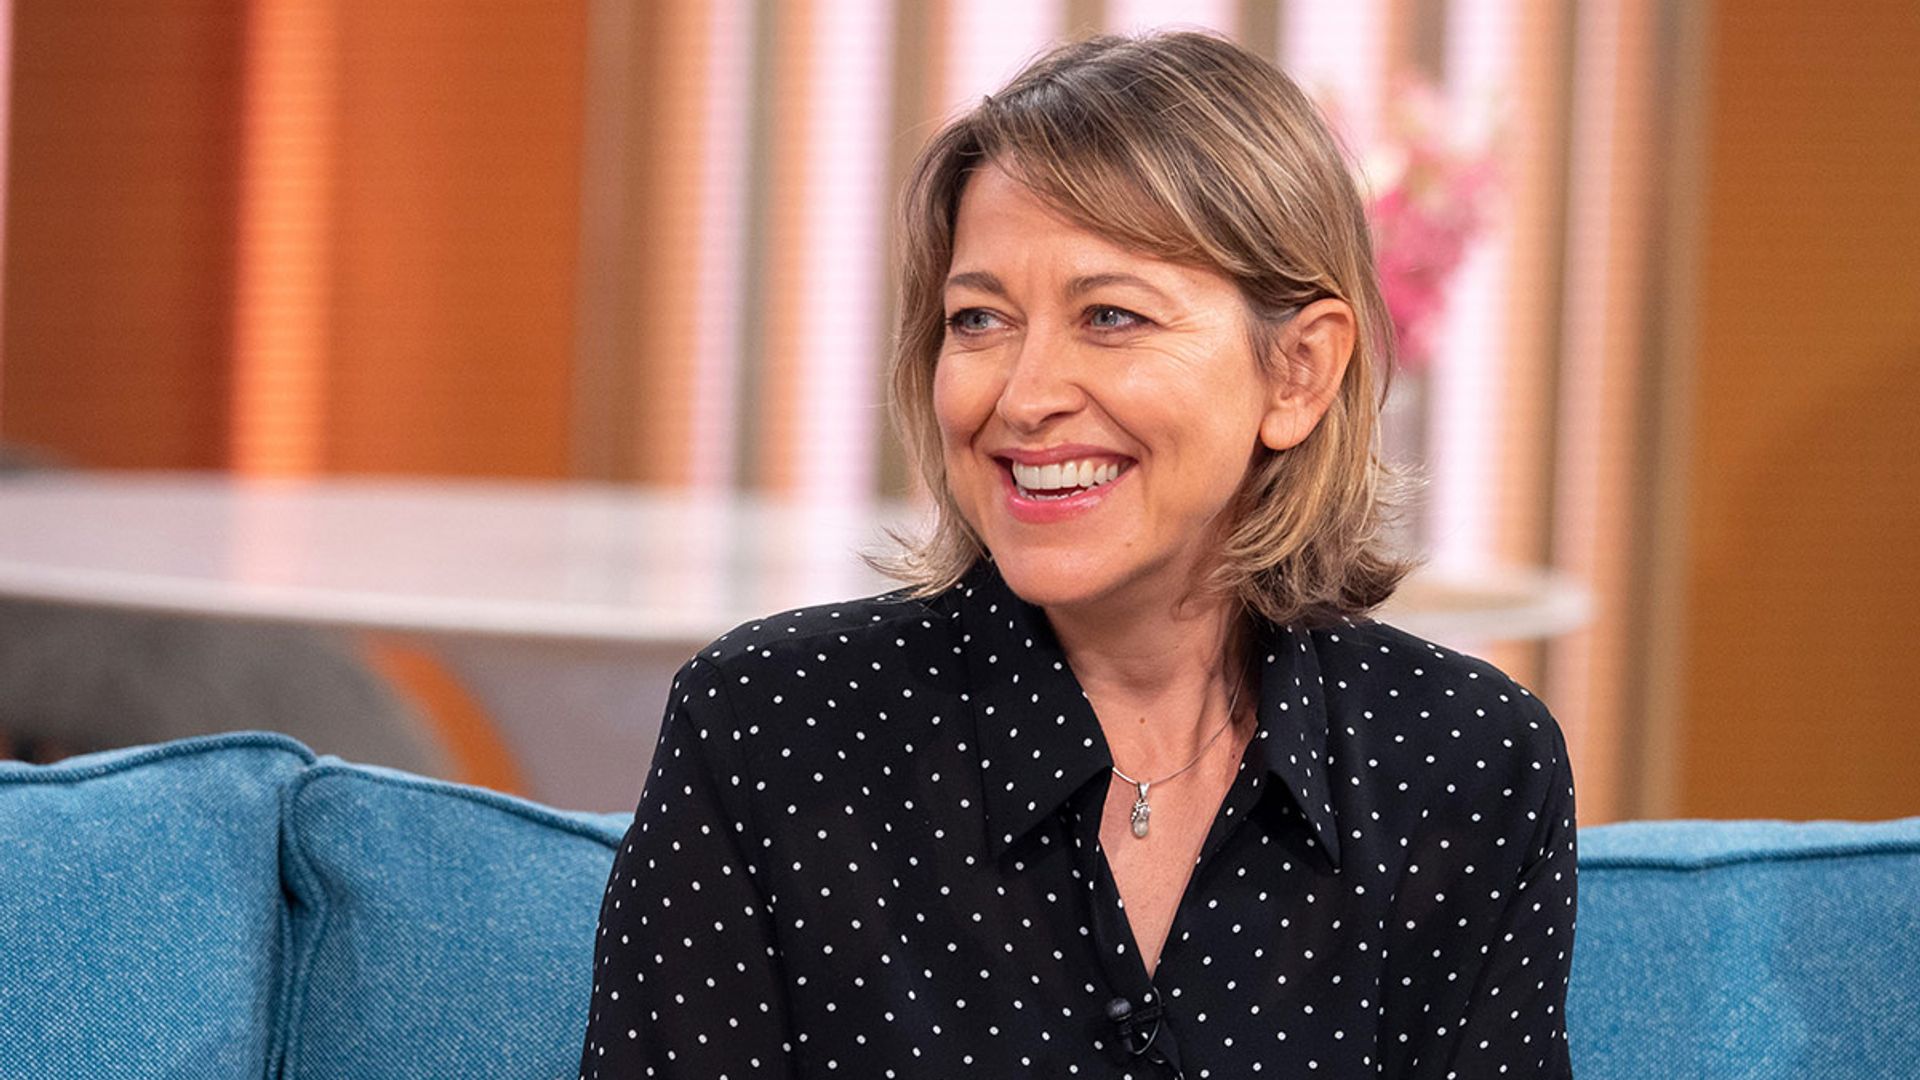 nicola walker everything you need to know